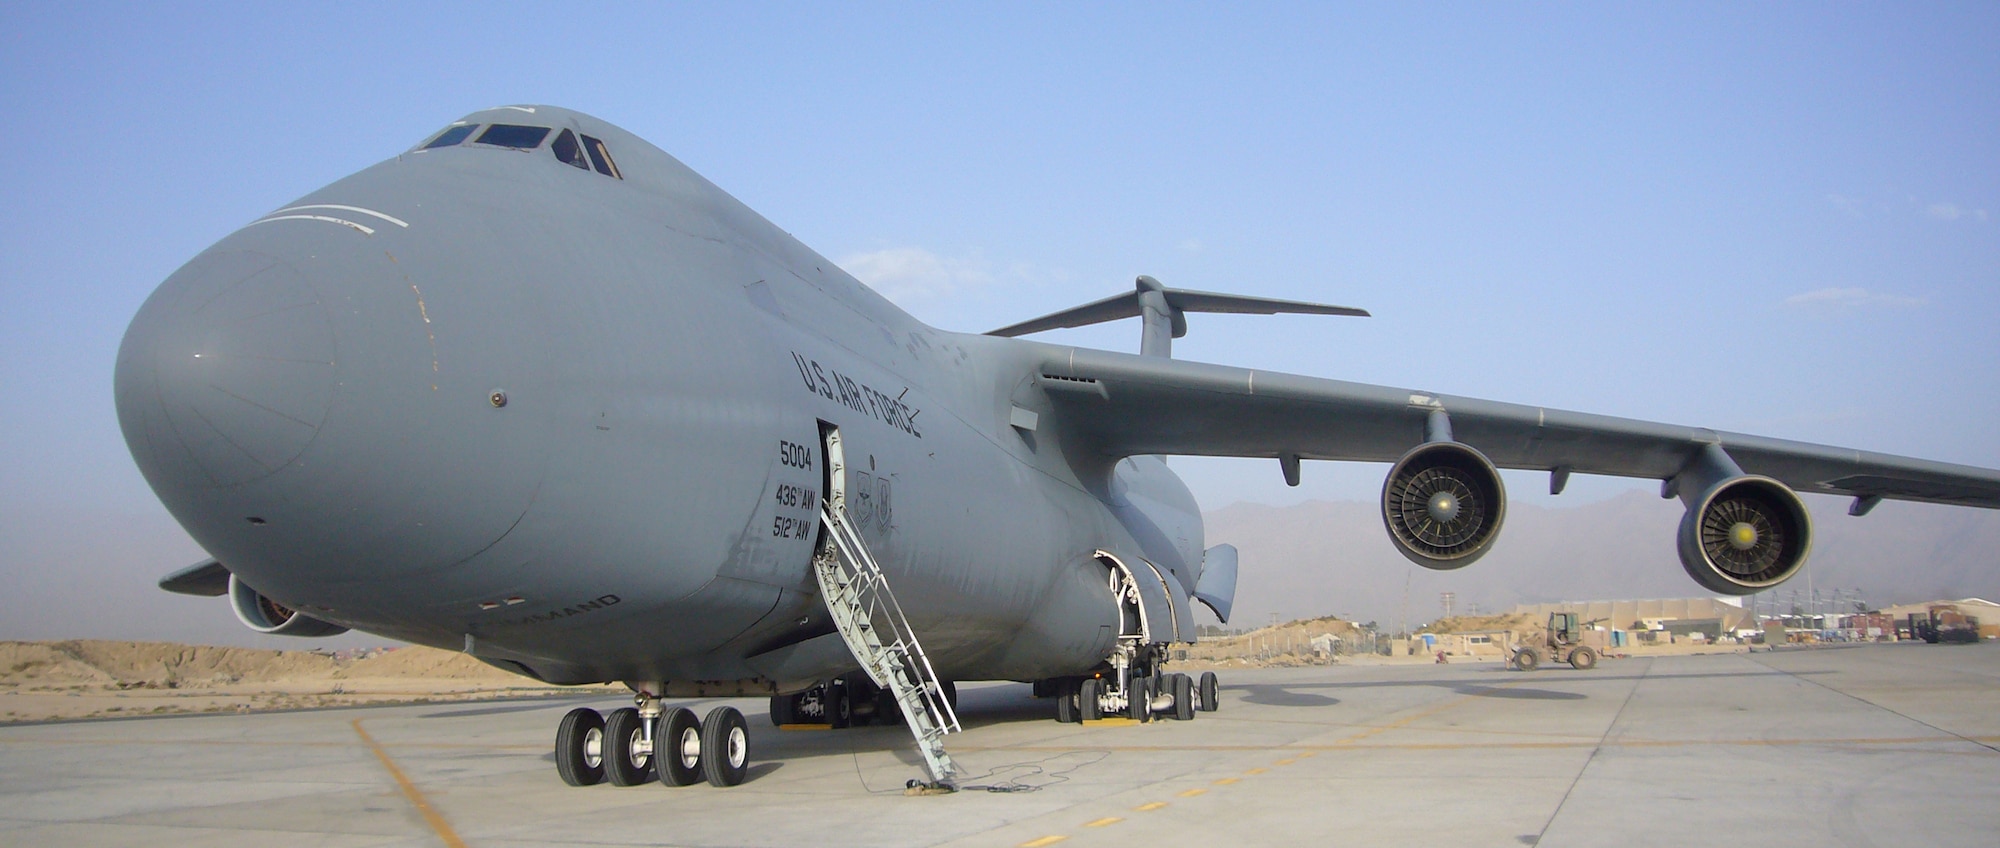 A C-5 Galaxy lands at Bagram Air Base, Afghanistan, without interruption to flight operations for the first time Sept. 22. (U.S. Air Force photo/Master Sgt. Jamie Cabral)